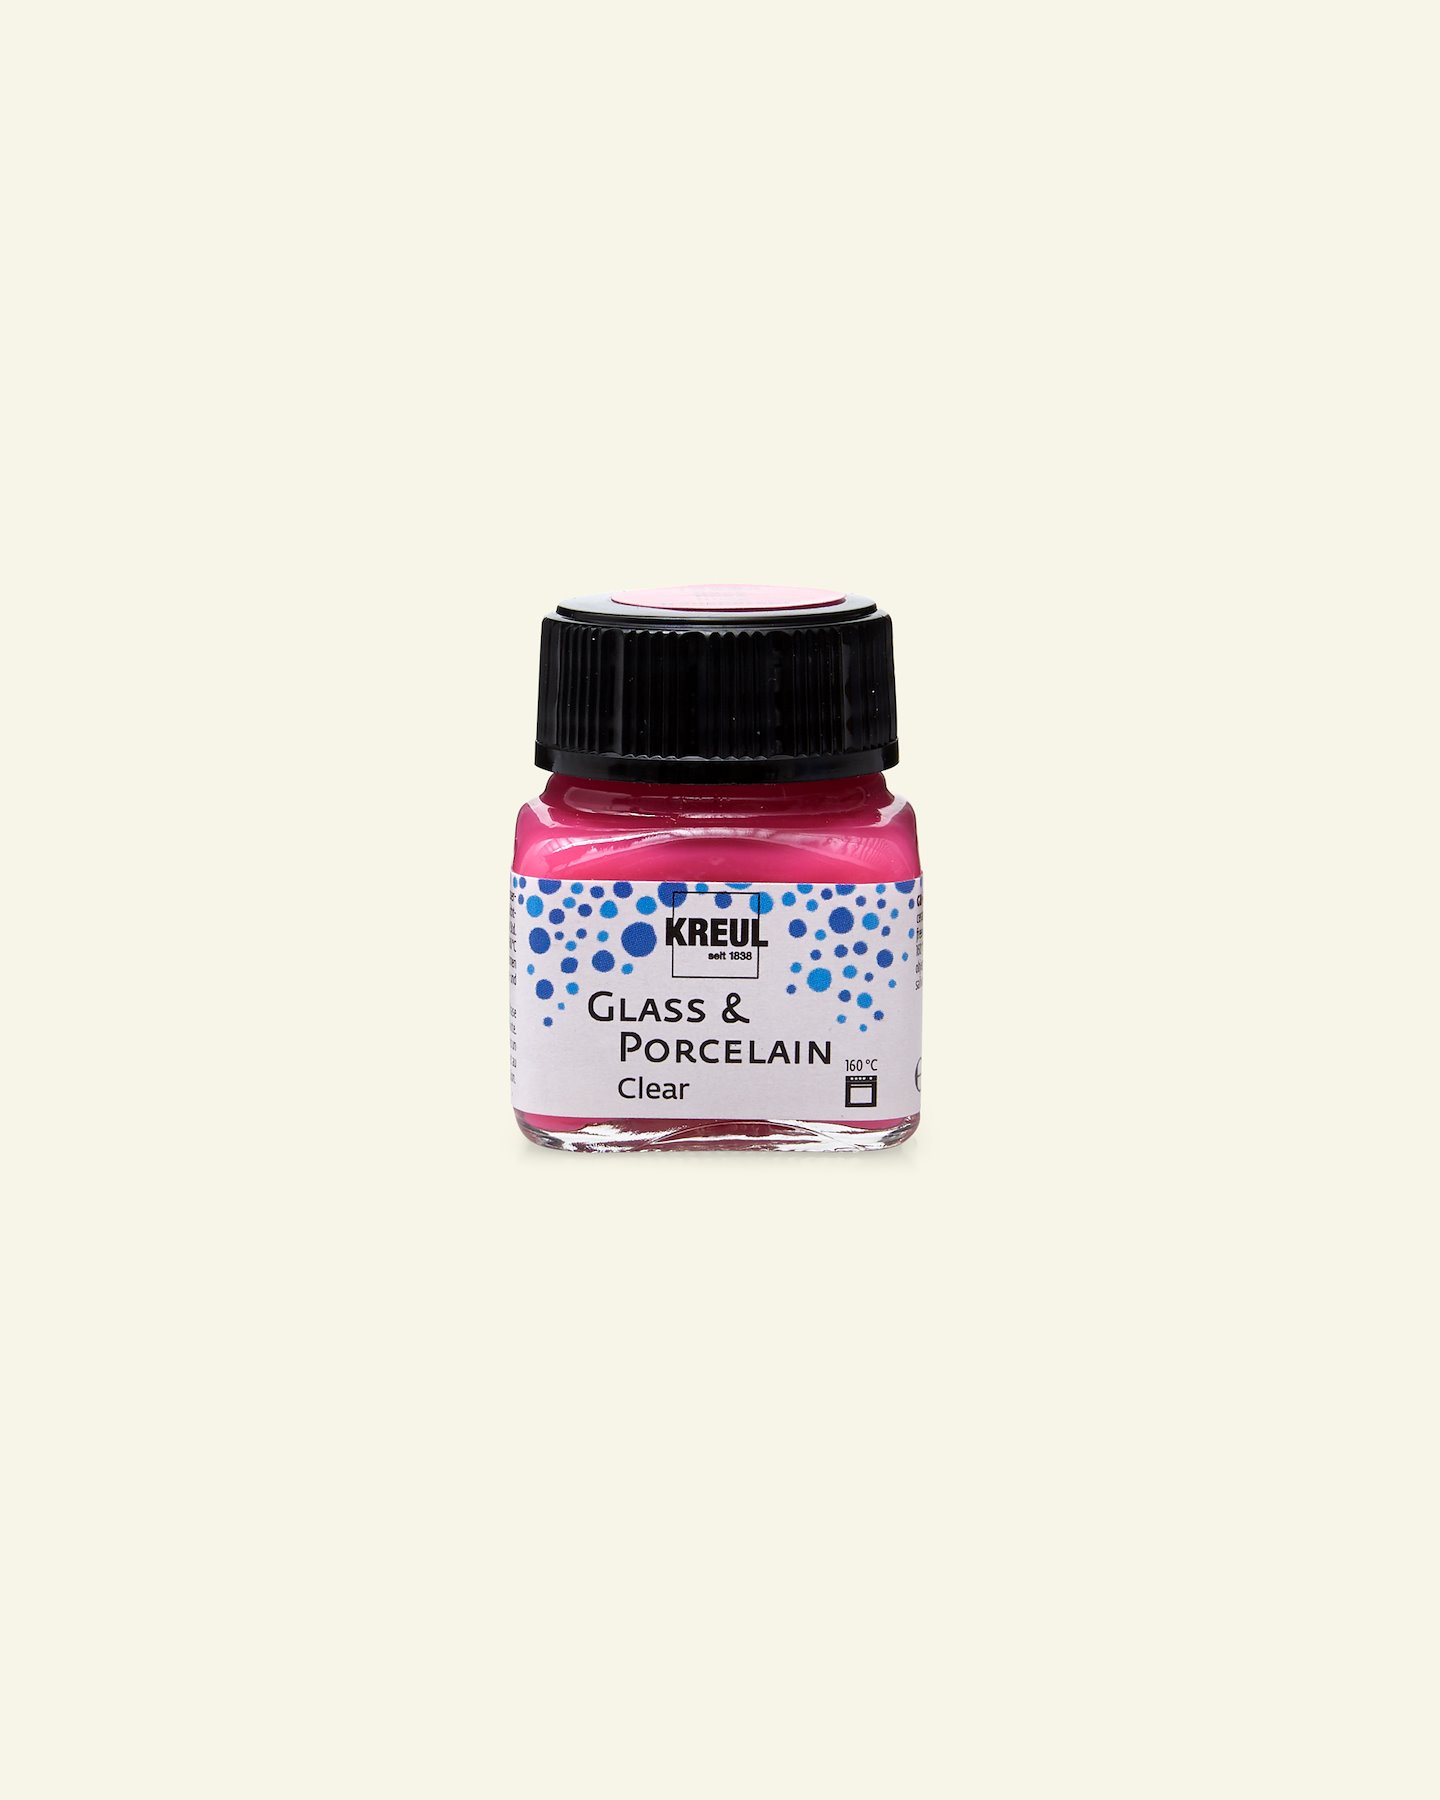 Glass&porcel. paint clear 20ml rose 31284_pack